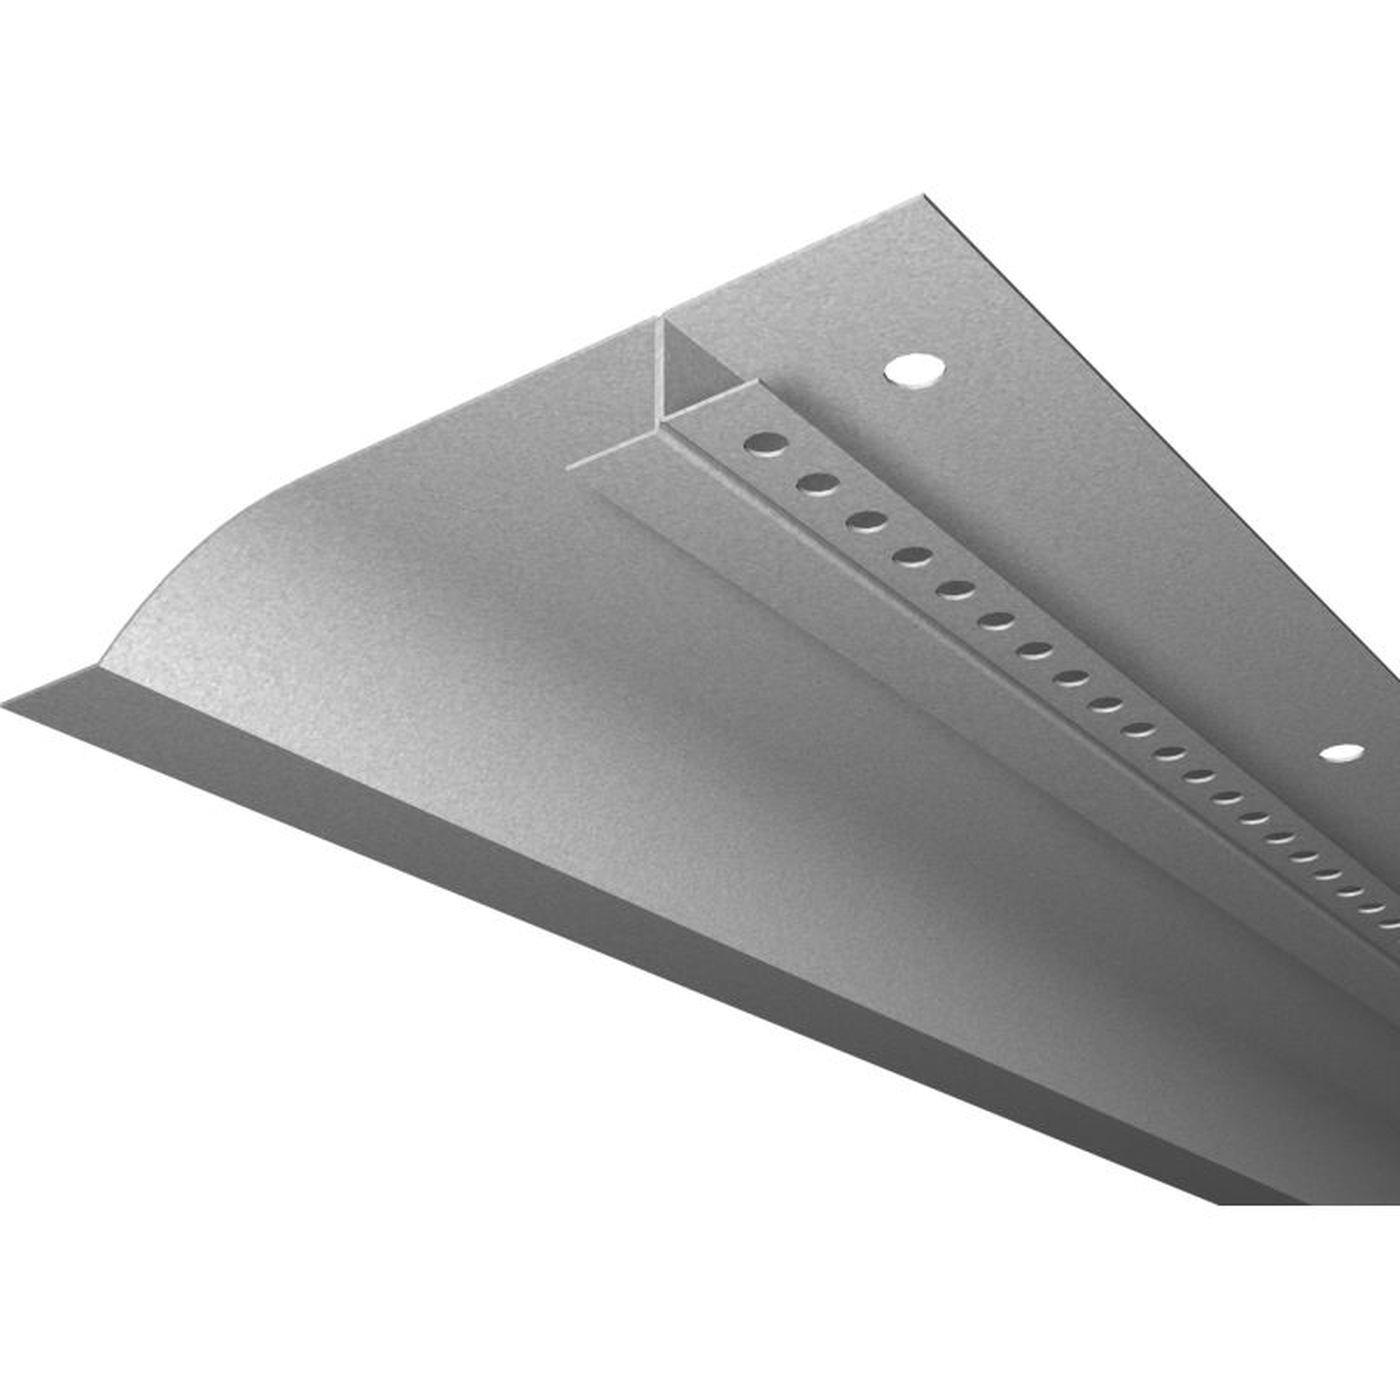 2m LED Drywall profile R10-R with reflector viewing leg for Plasterboard Steel Zinc sheet